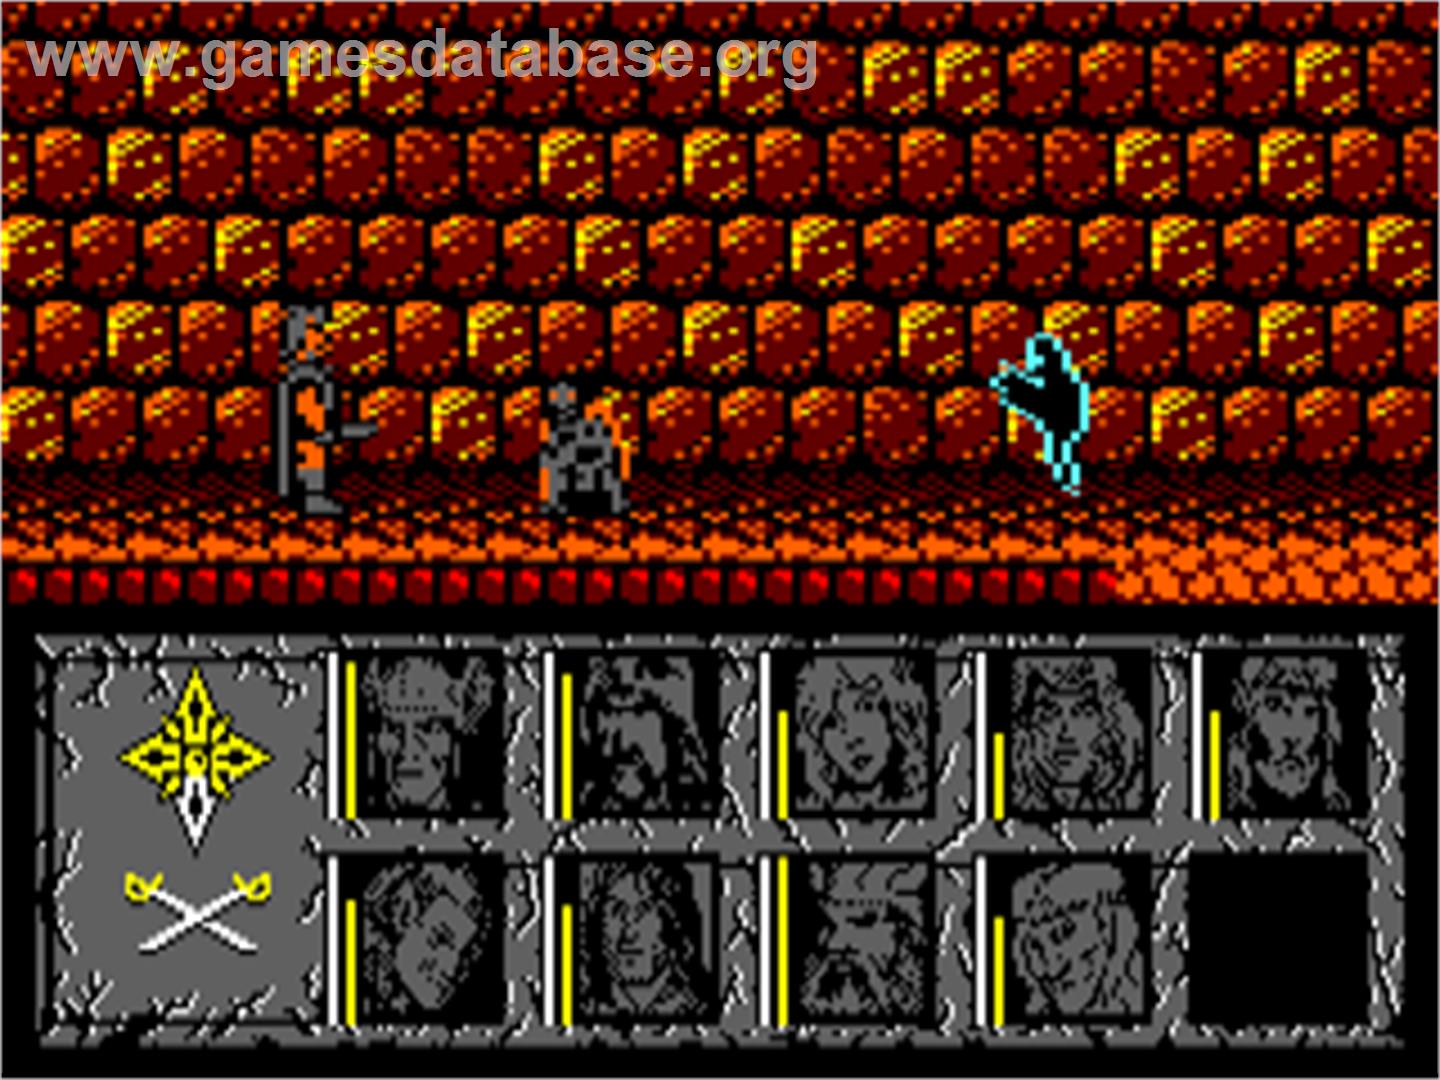 Dragons of Flame - Amstrad CPC - Artwork - In Game